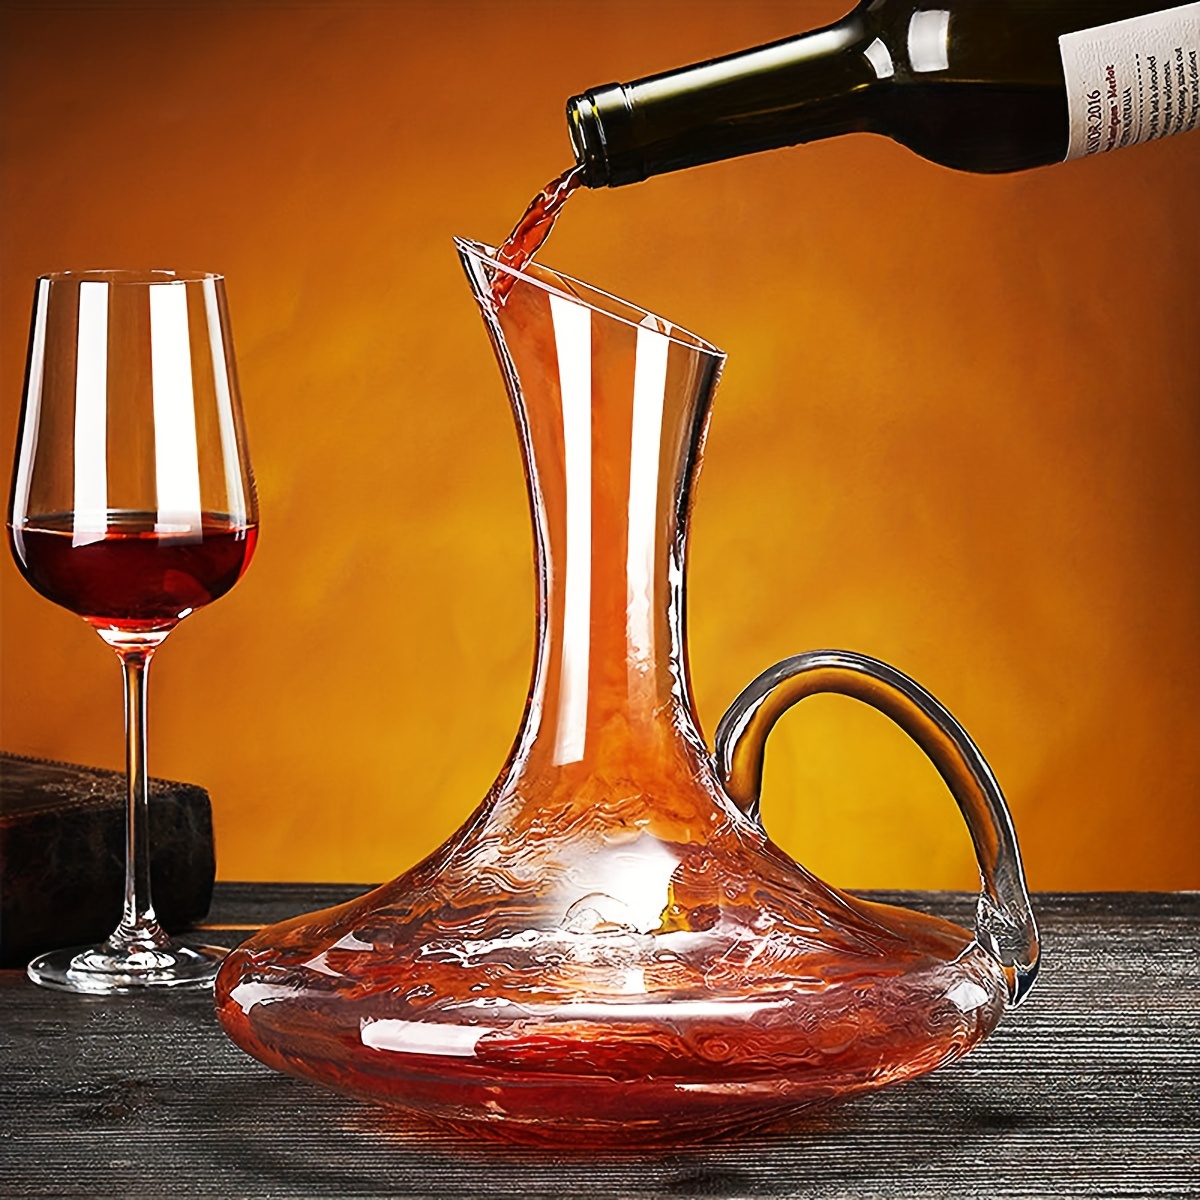 Slanted Mouth Water Pitcher Crystal Glass Wine Decanter Set Red Wine Carafe  - China Decanter and Glass Decanter price